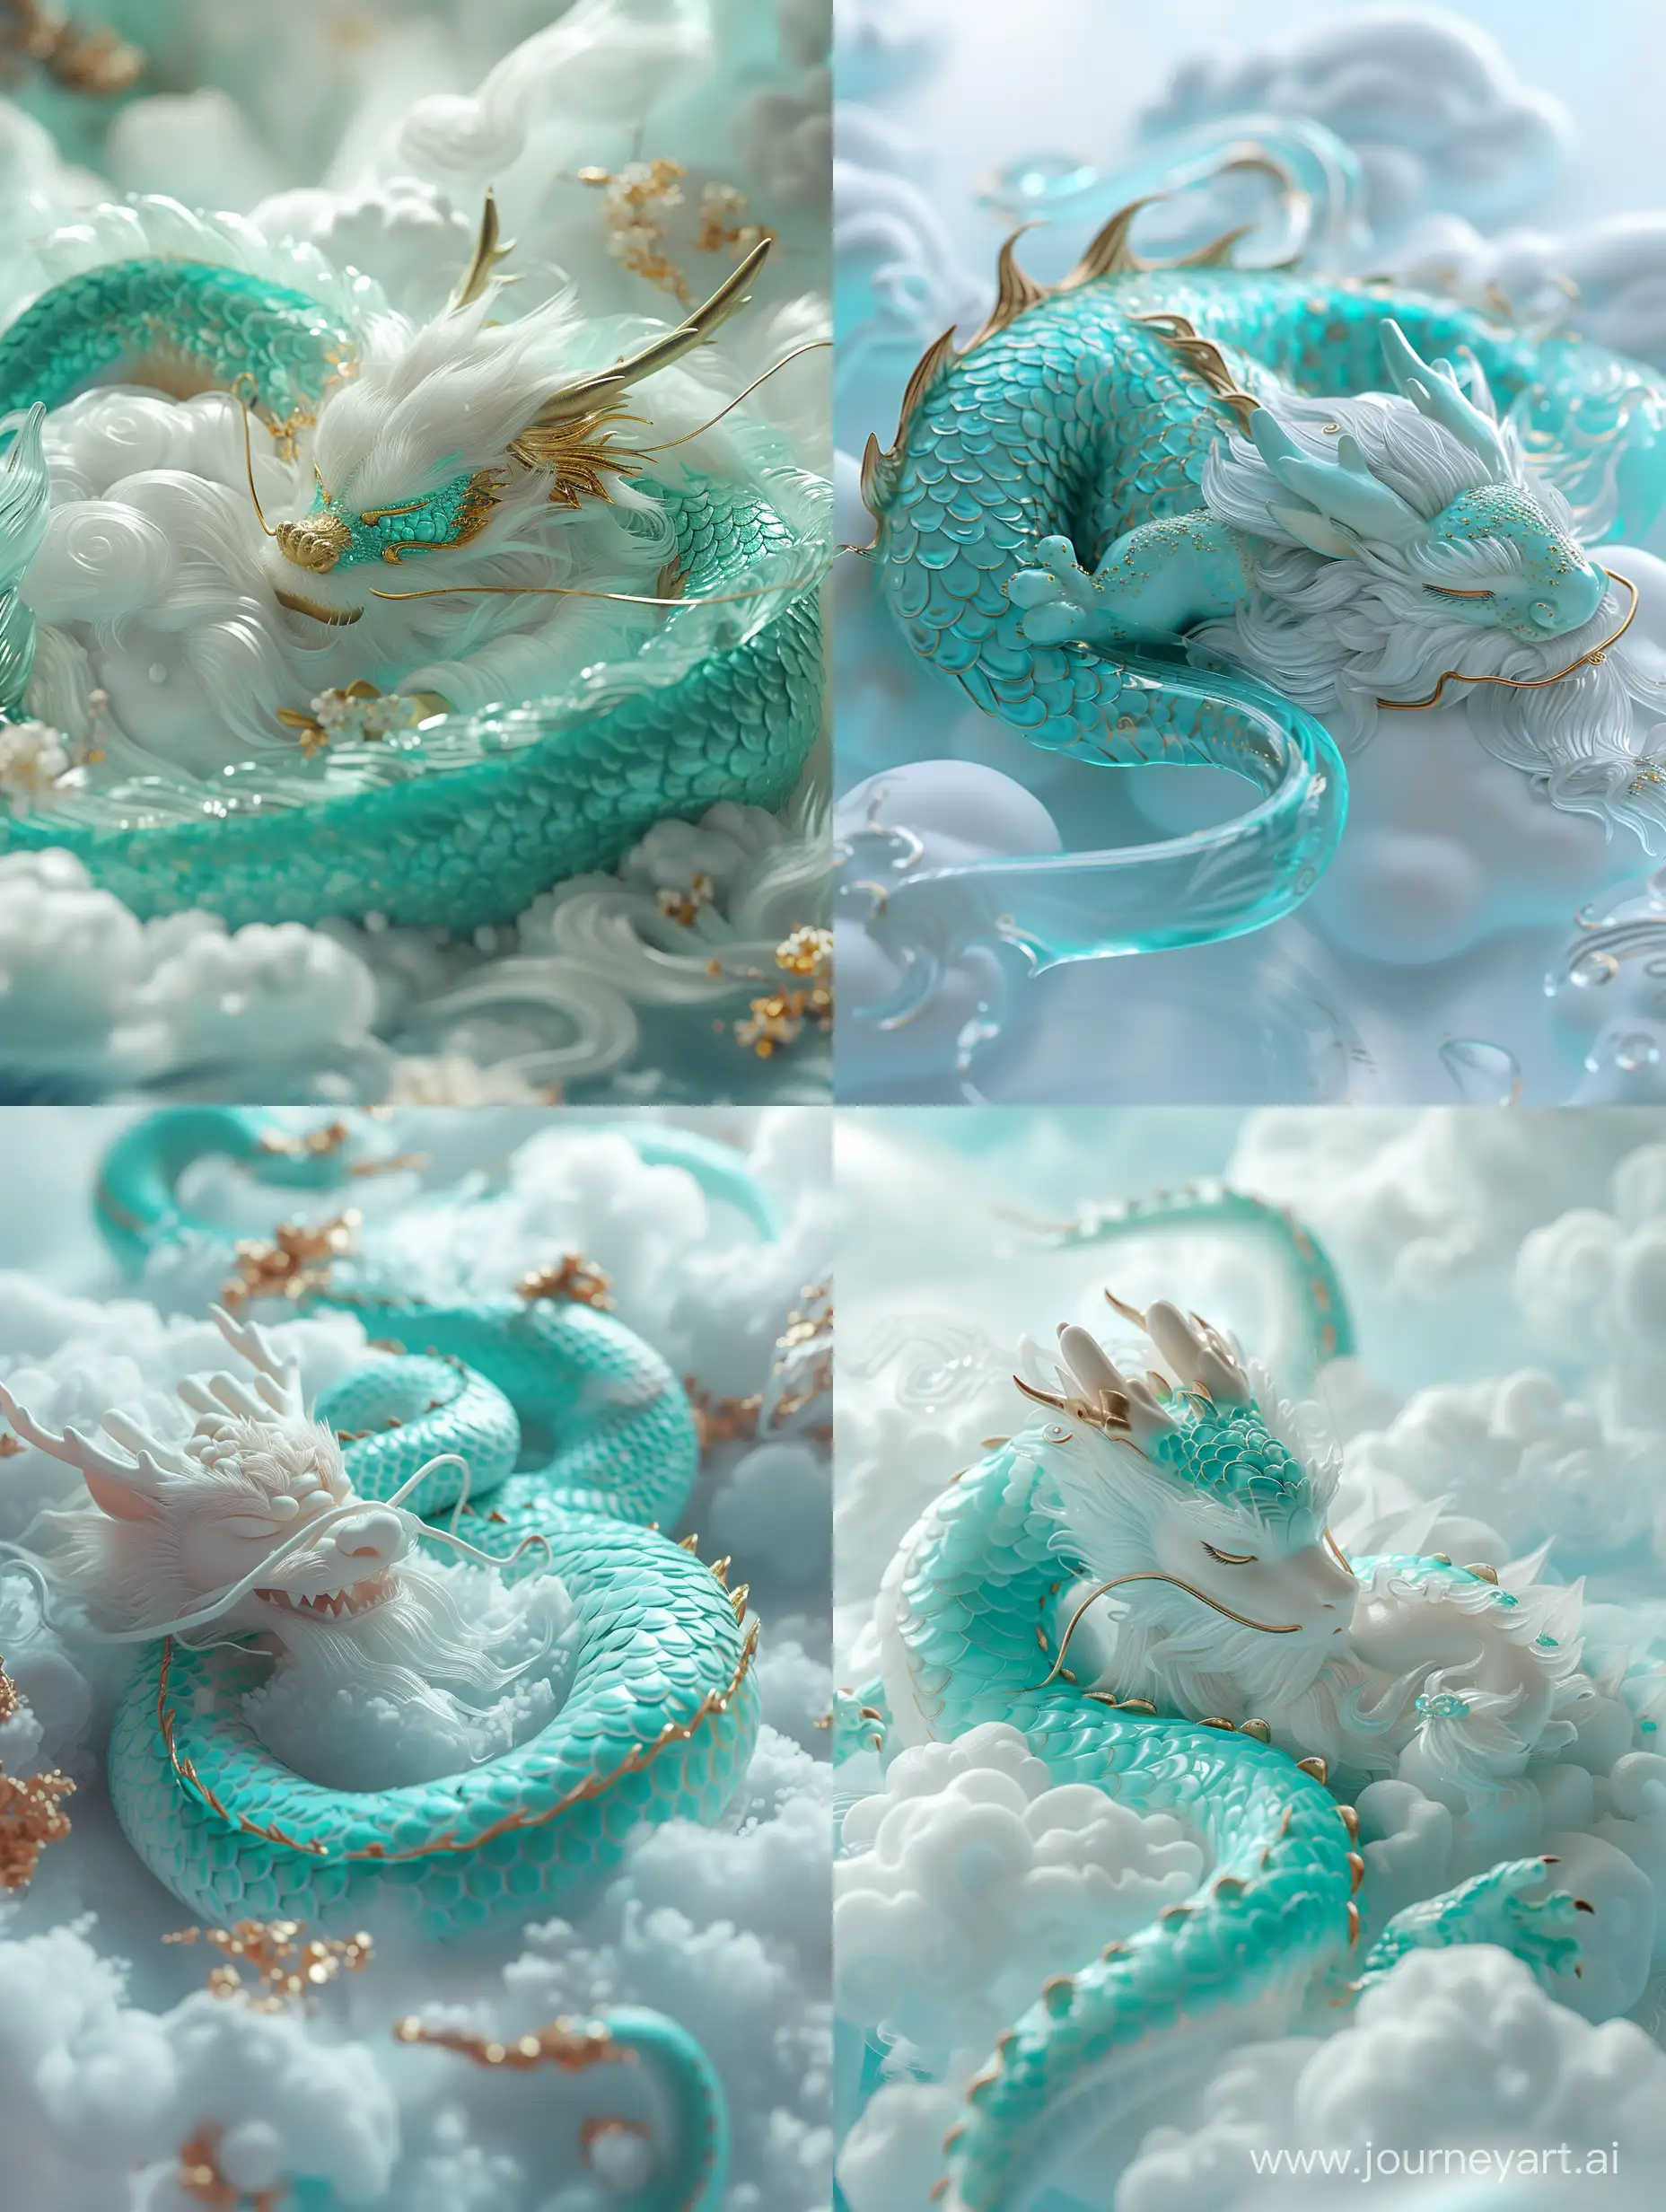 Ethereal-Chinese-Dragon-in-Turquoise-and-Gold-Translucent-Cloud-Slumber